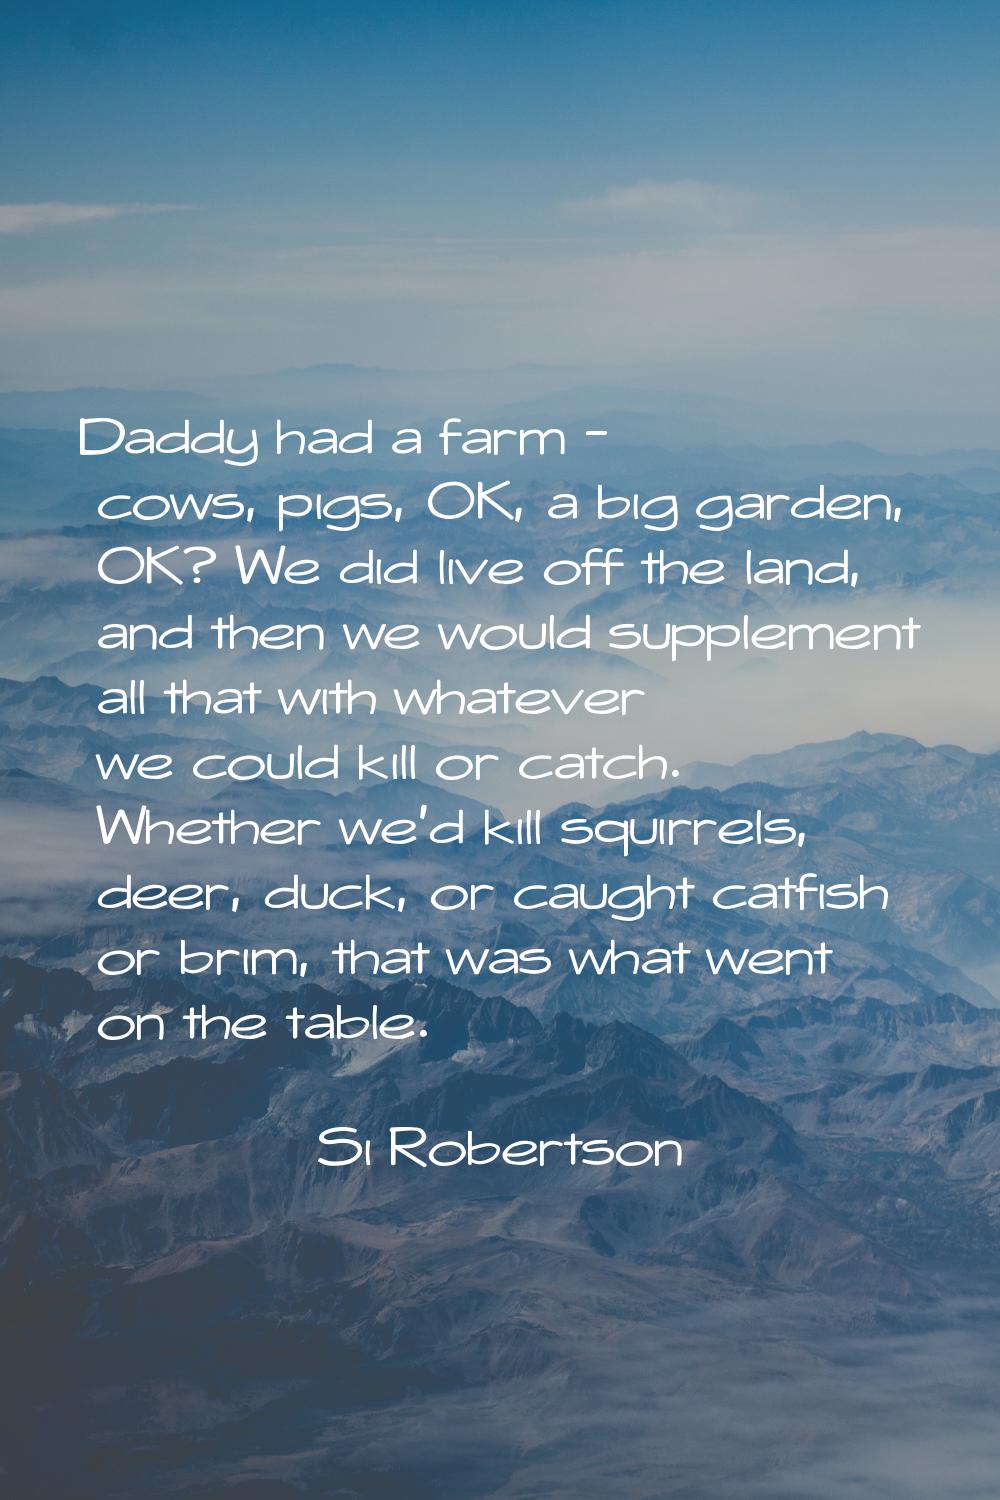 Daddy had a farm - cows, pigs, OK, a big garden, OK? We did live off the land, and then we would su